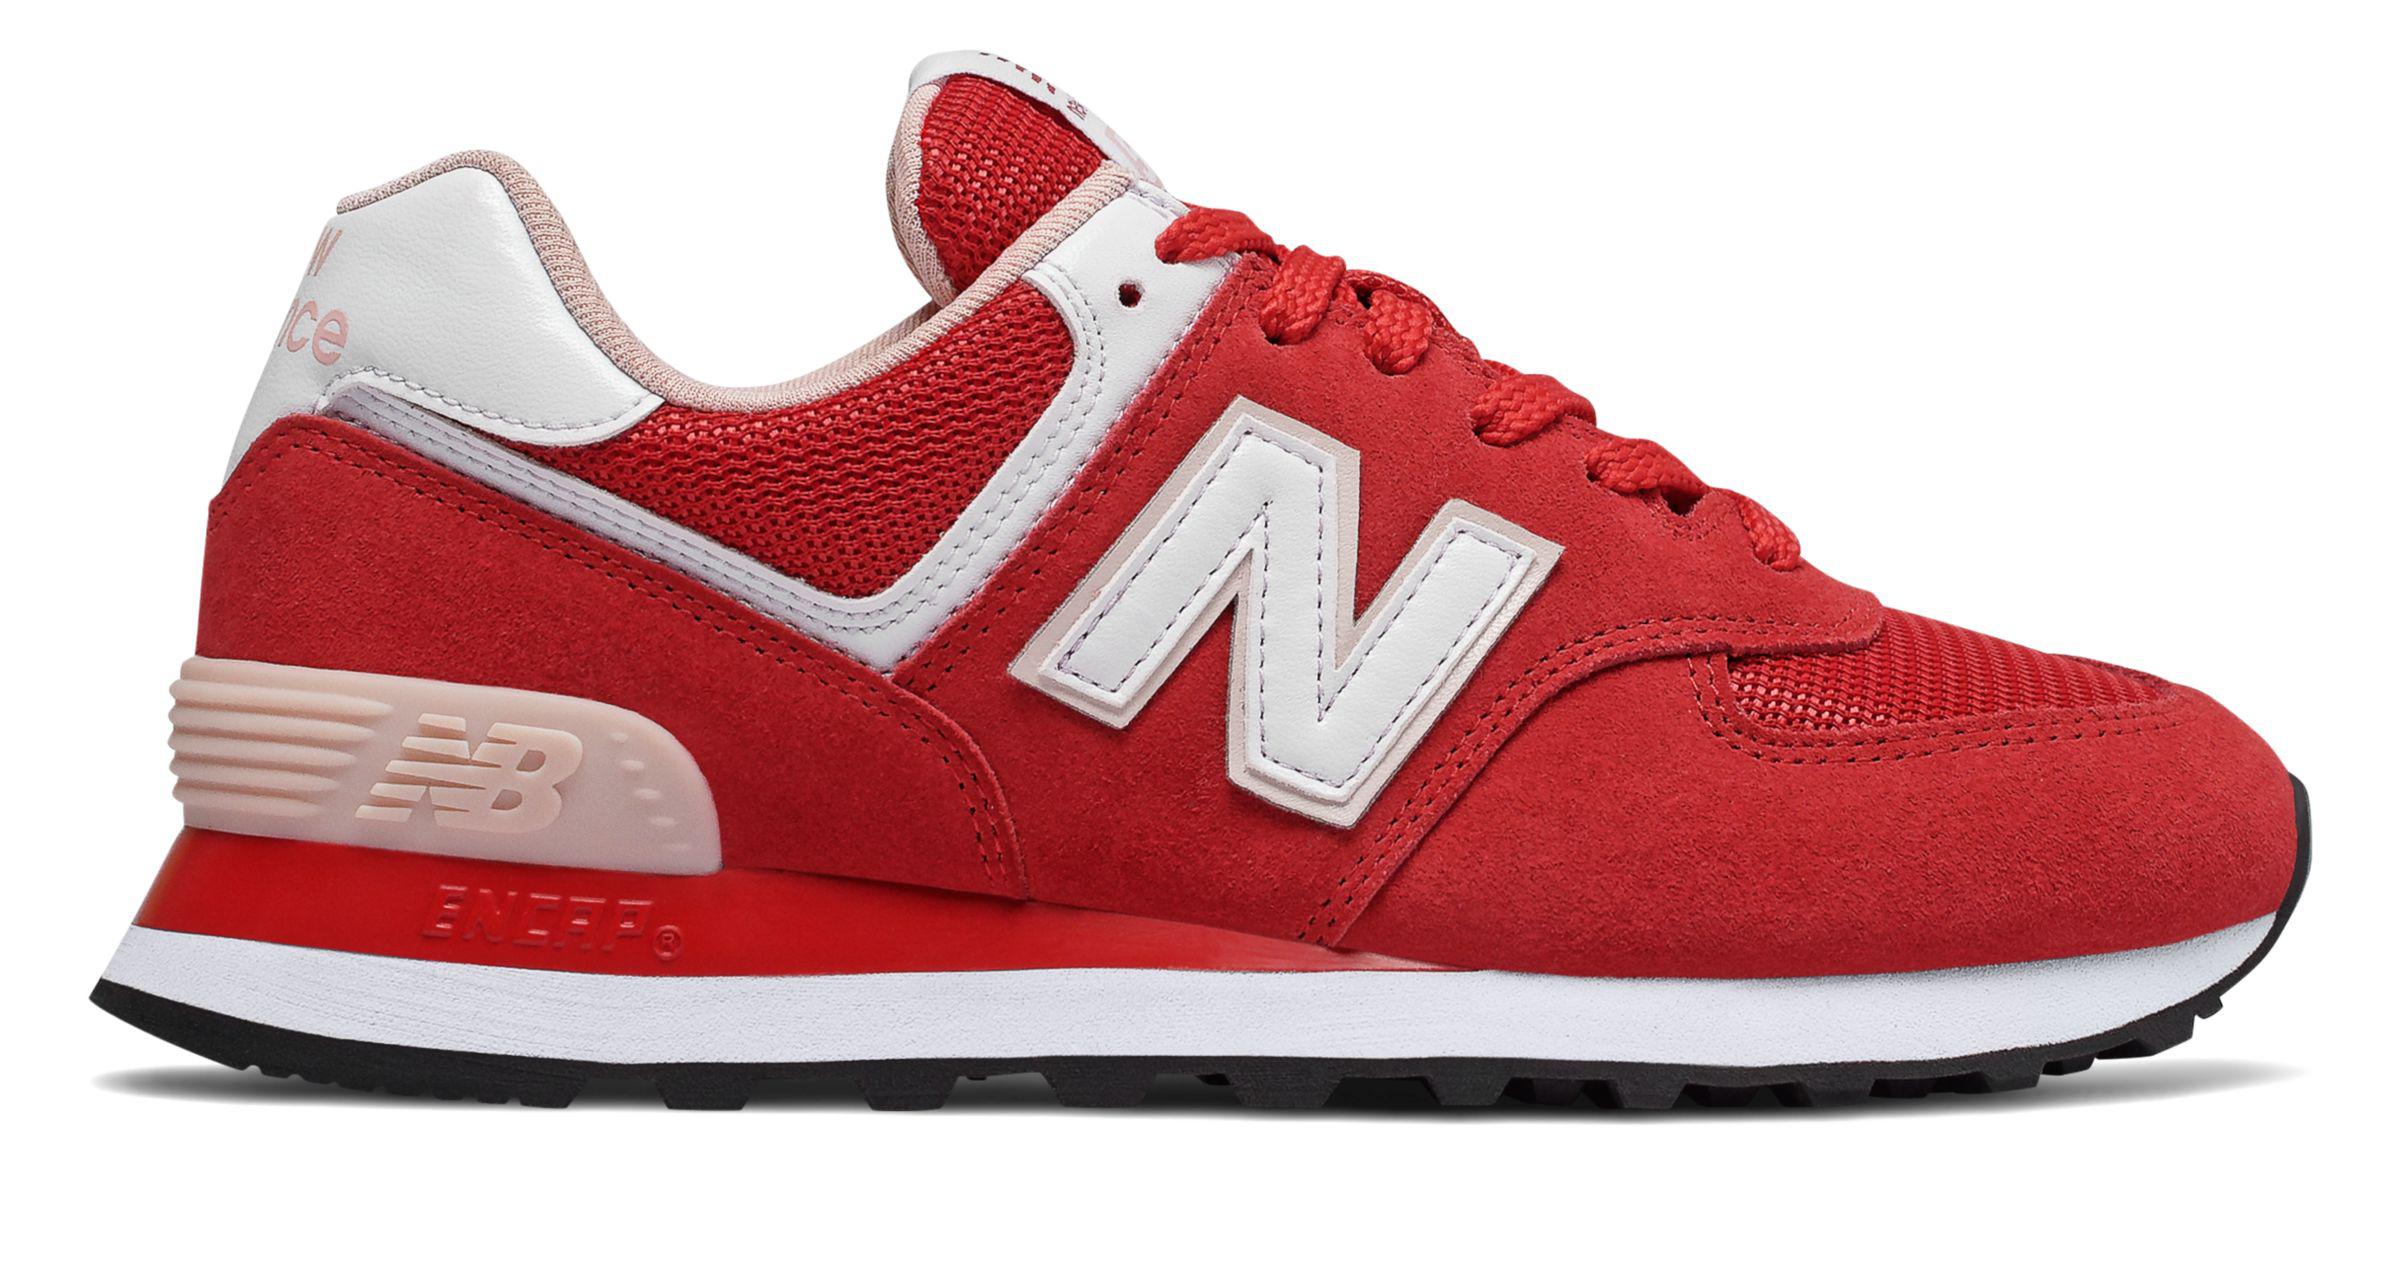 New Balance Suede 574 Valentines Day in 